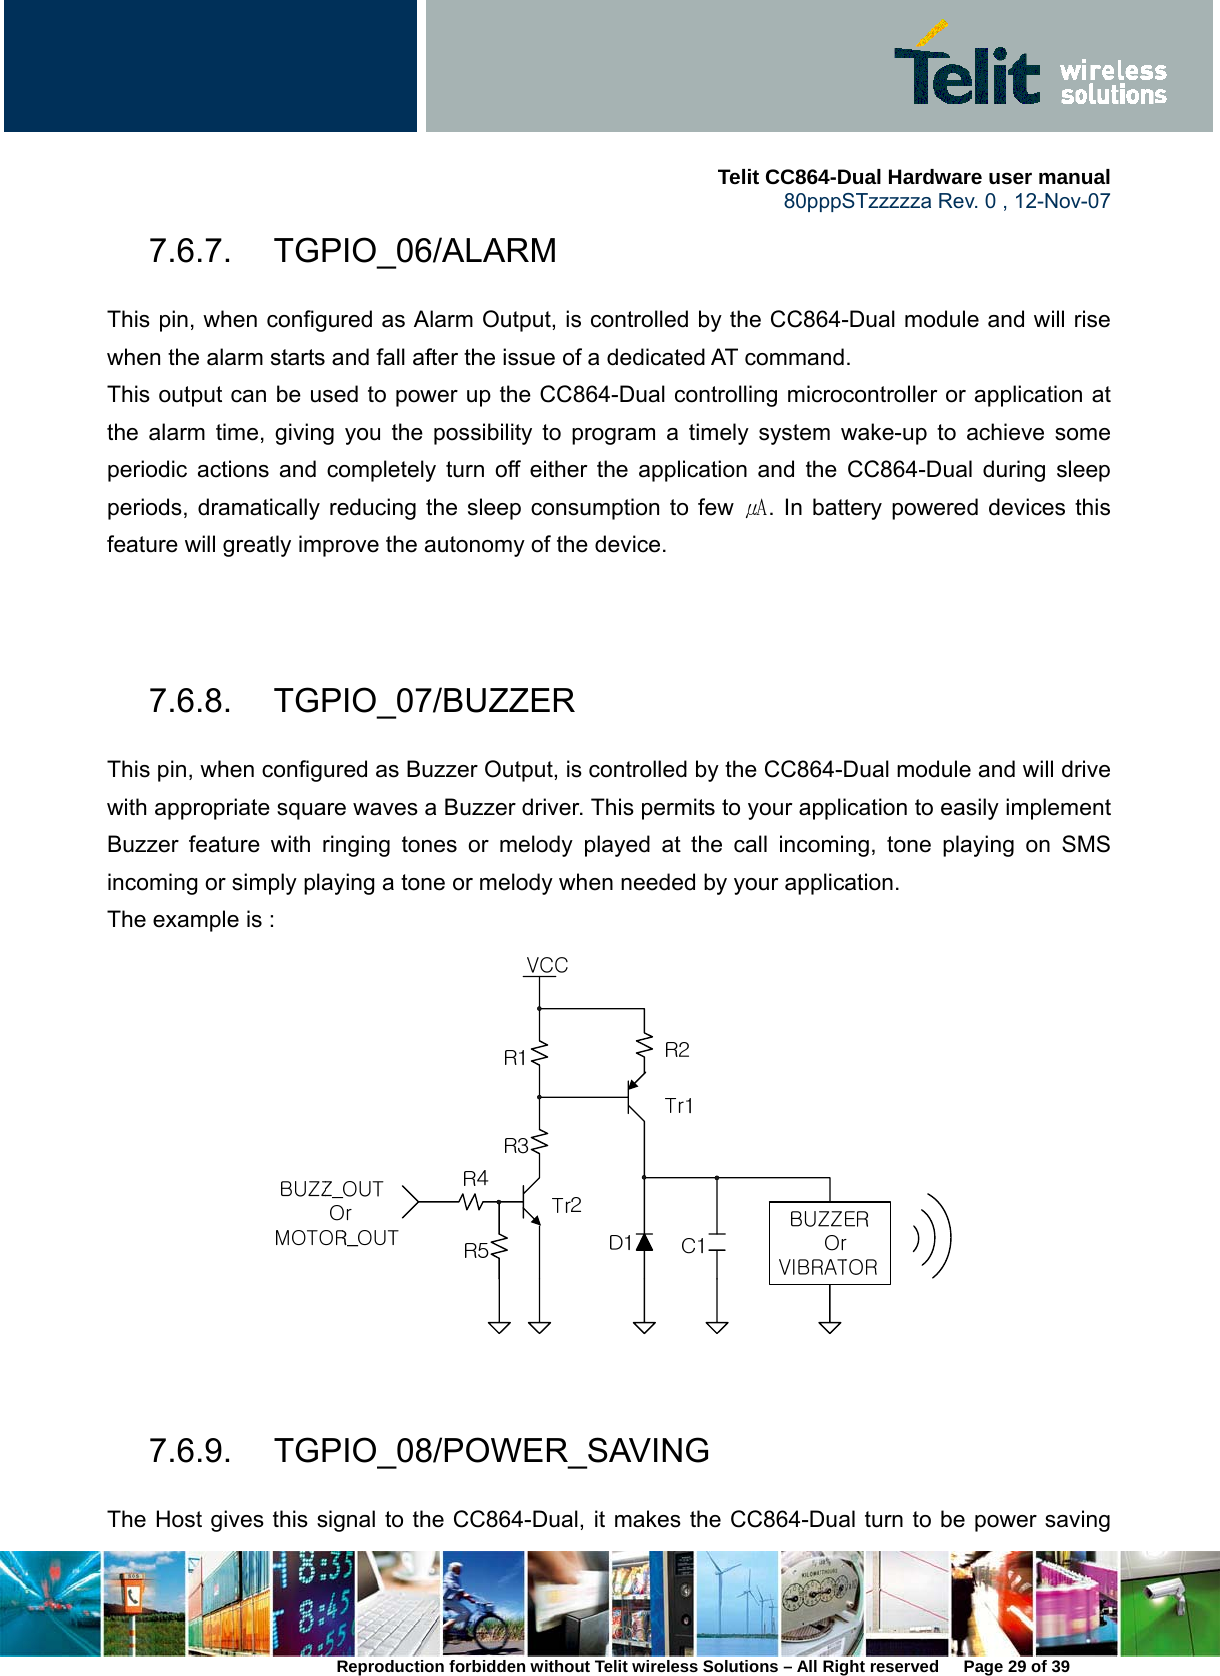     Telit CC864-Dual Hardware user manual   80pppSTzzzzza Rev. 0 , 12-Nov-07 Reproduction forbidden without Telit wireless Solutions – All Right reserved      Page 29 of 39 7.6.7. TGPIO_06/ALARM This pin, when configured as Alarm Output, is controlled by the CC864-Dual module and will rise when the alarm starts and fall after the issue of a dedicated AT command. This output can be used to power up the CC864-Dual controlling microcontroller or application at the alarm time, giving you the possibility to program a timely system wake-up to achieve some periodic actions and completely turn off either the application and the CC864-Dual during sleep periods, dramatically reducing the sleep consumption to few ㎂. In battery powered devices this feature will greatly improve the autonomy of the device.   7.6.8. TGPIO_07/BUZZER This pin, when configured as Buzzer Output, is controlled by the CC864-Dual module and will drive with appropriate square waves a Buzzer driver. This permits to your application to easily implement Buzzer feature with ringing tones or melody played at the call incoming, tone playing on SMS incoming or simply playing a tone or melody when needed by your application. The example is :   7.6.9. TGPIO_08/POWER_SAVING The Host gives this signal to the CC864-Dual, it makes the CC864-Dual turn to be power saving 